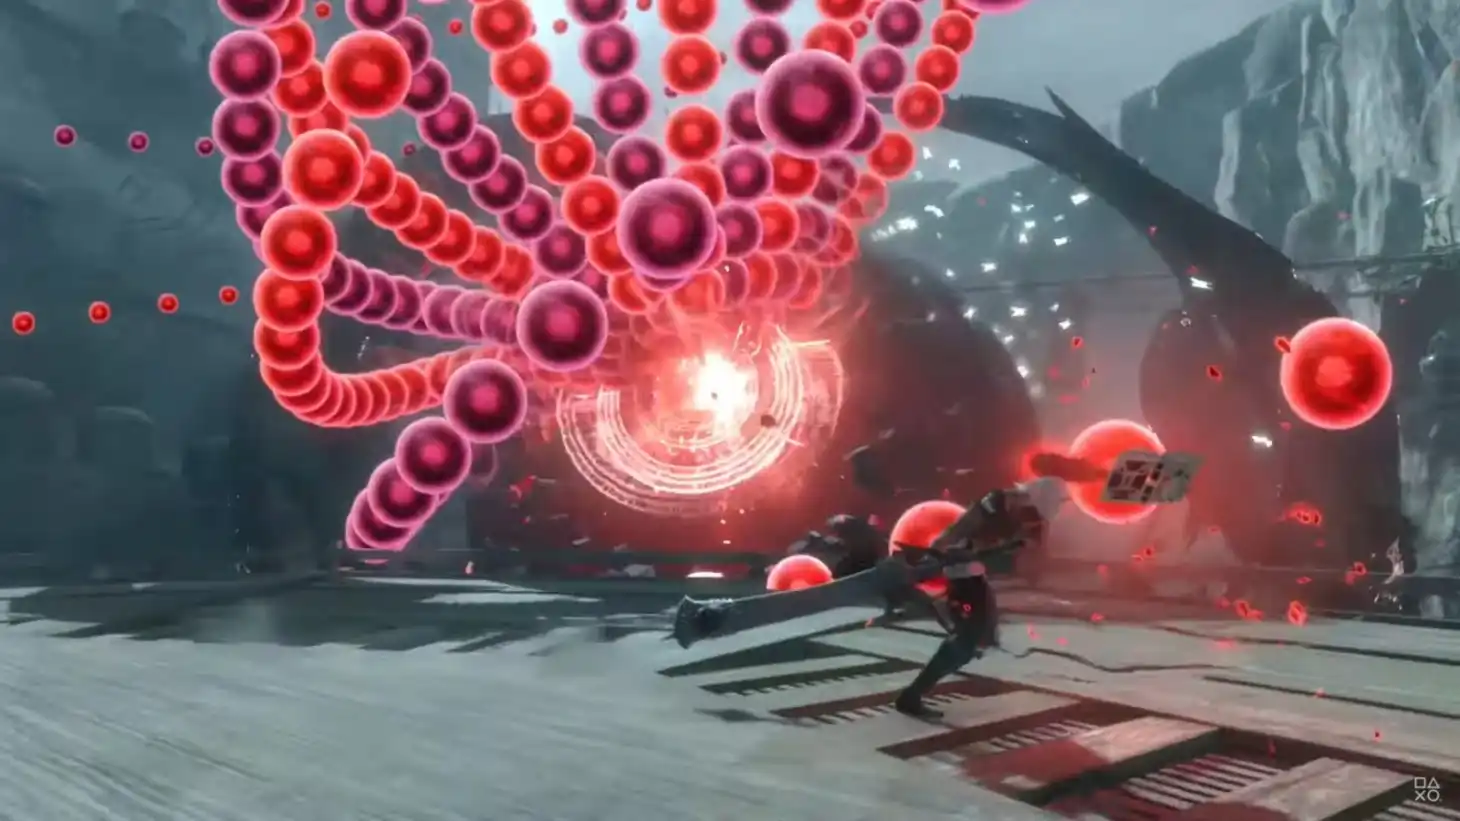 Screenshot from NieR Replicant. The player dodges through a curtain of red and purple bullets.